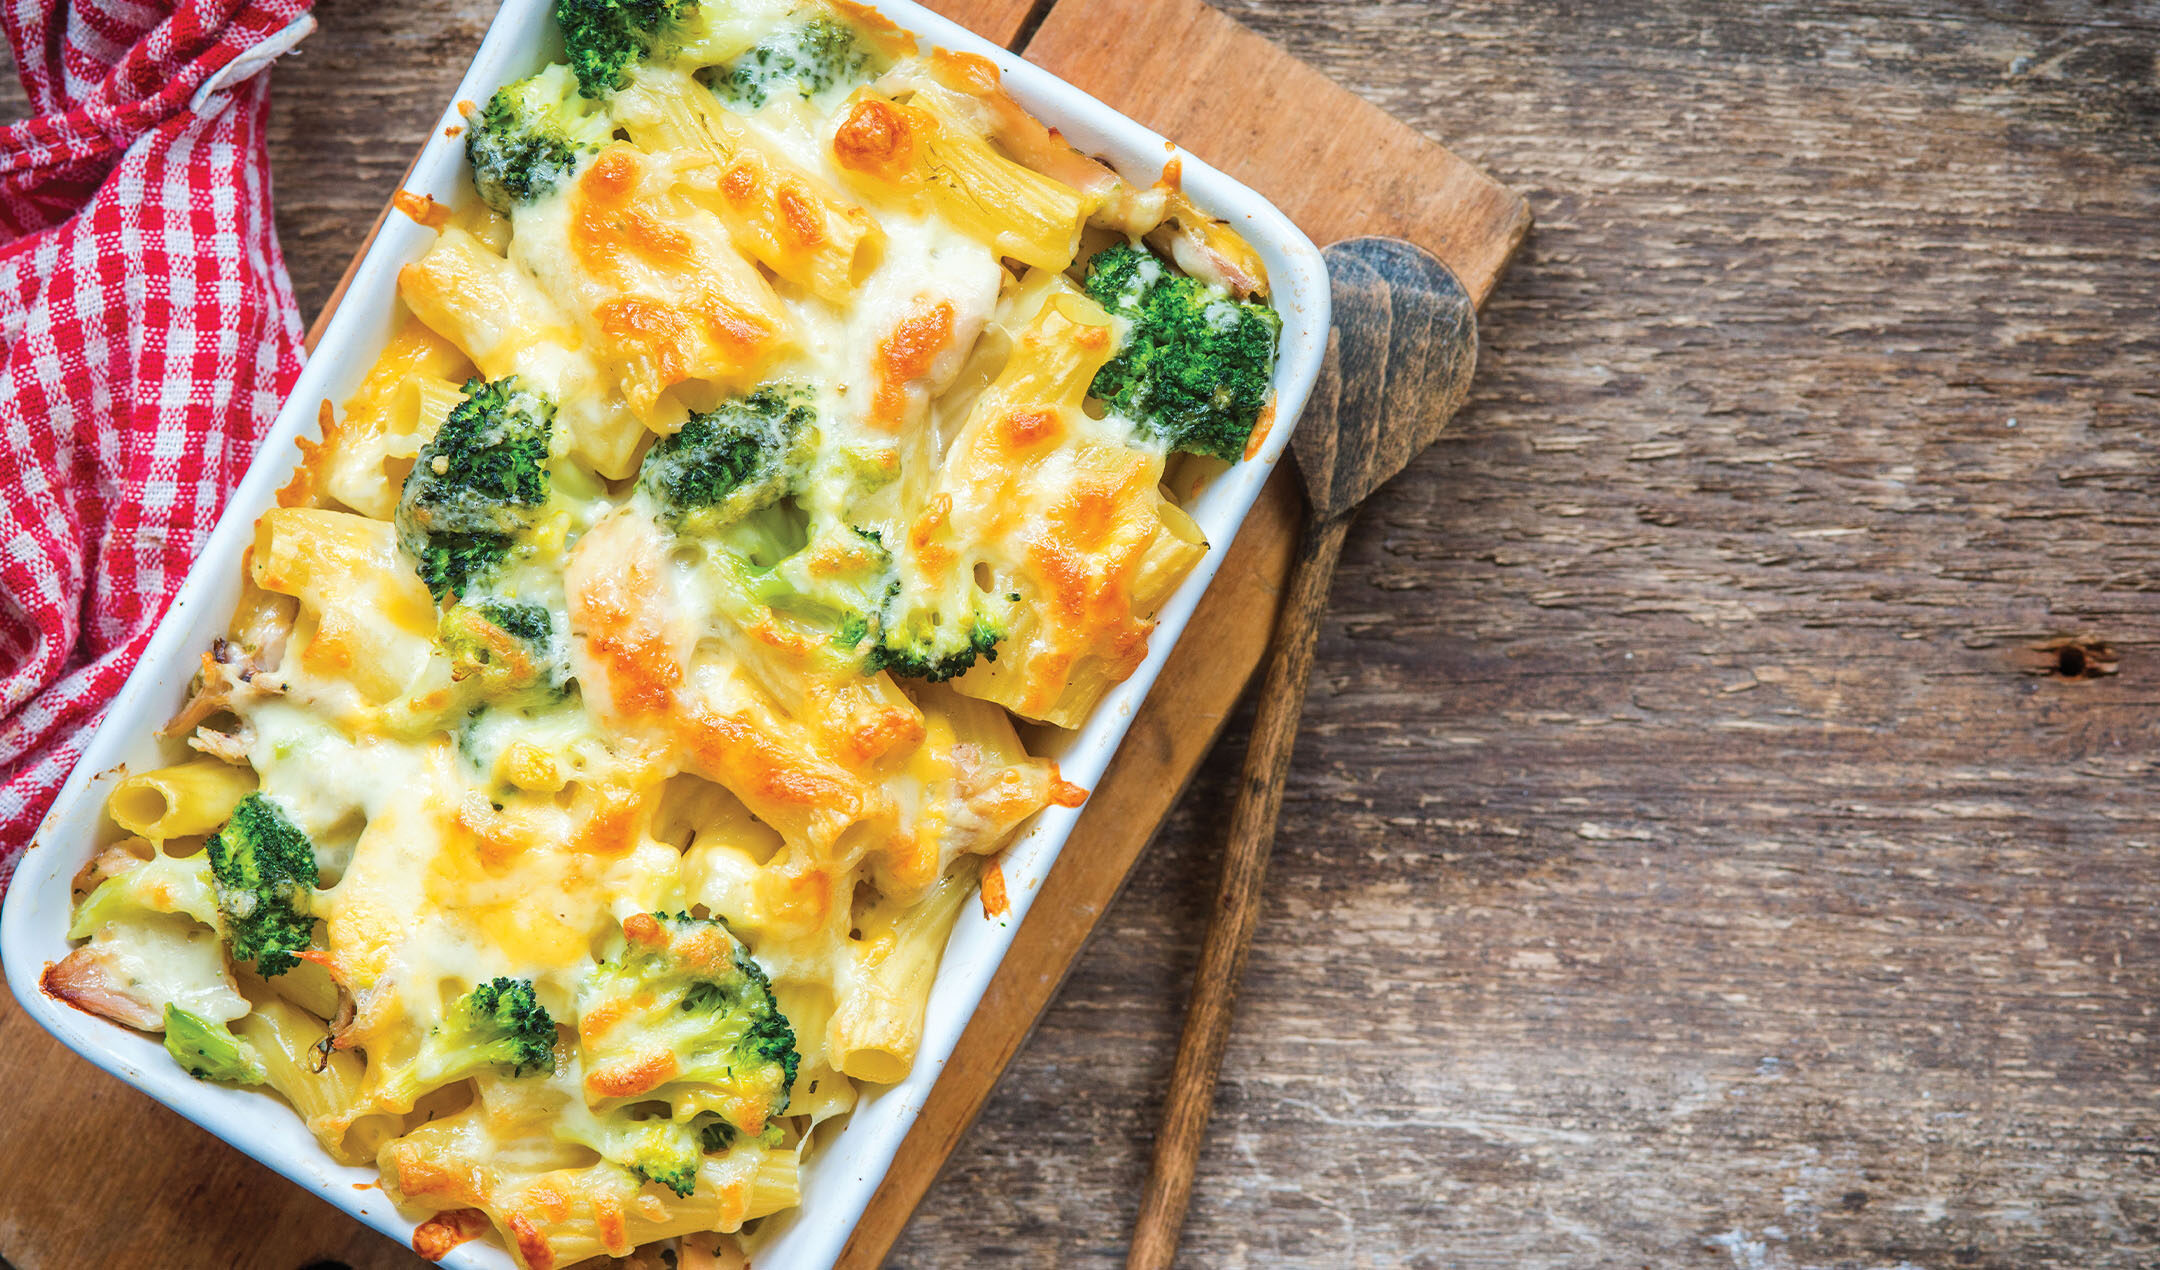 Chicken and broccoli bake recipe | easyFood